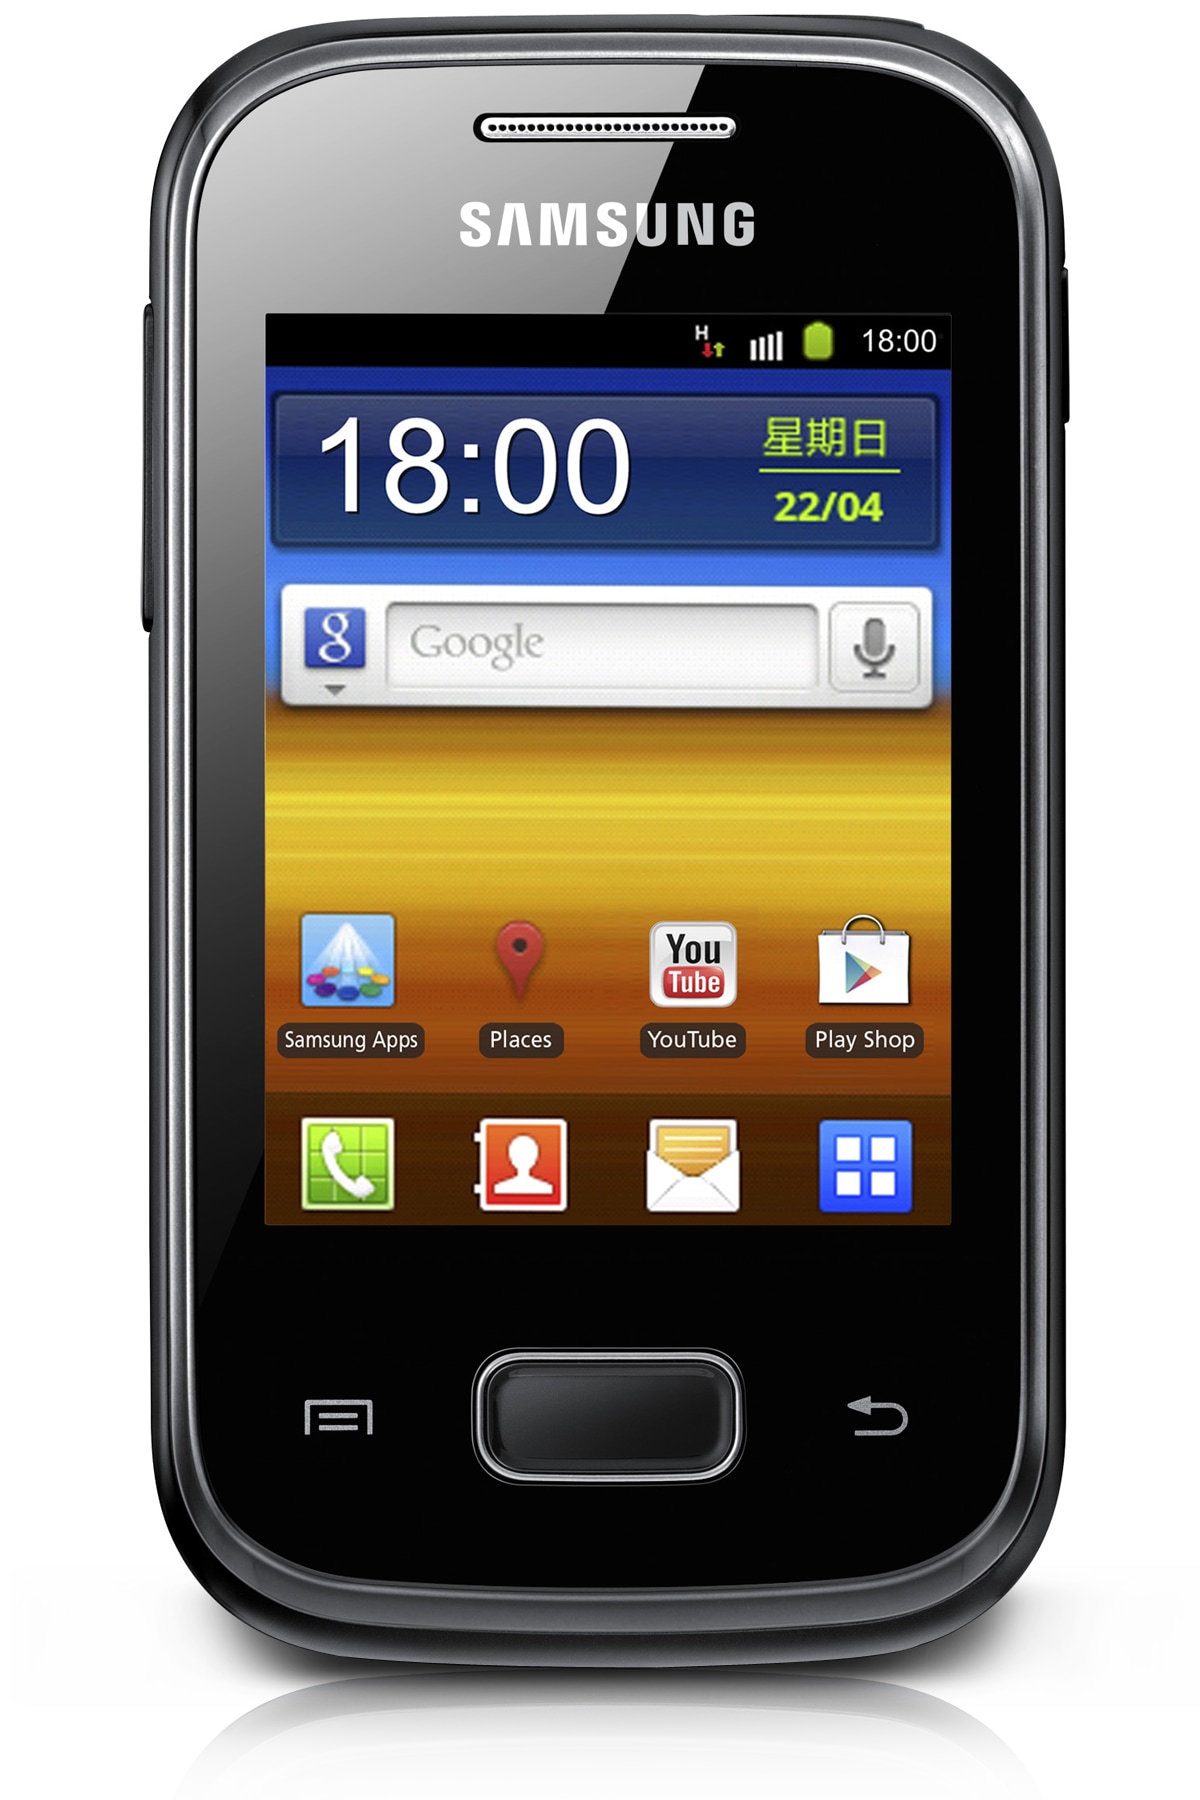 Whatsapp Download For Samsung Galaxy Pocket Gt S5300